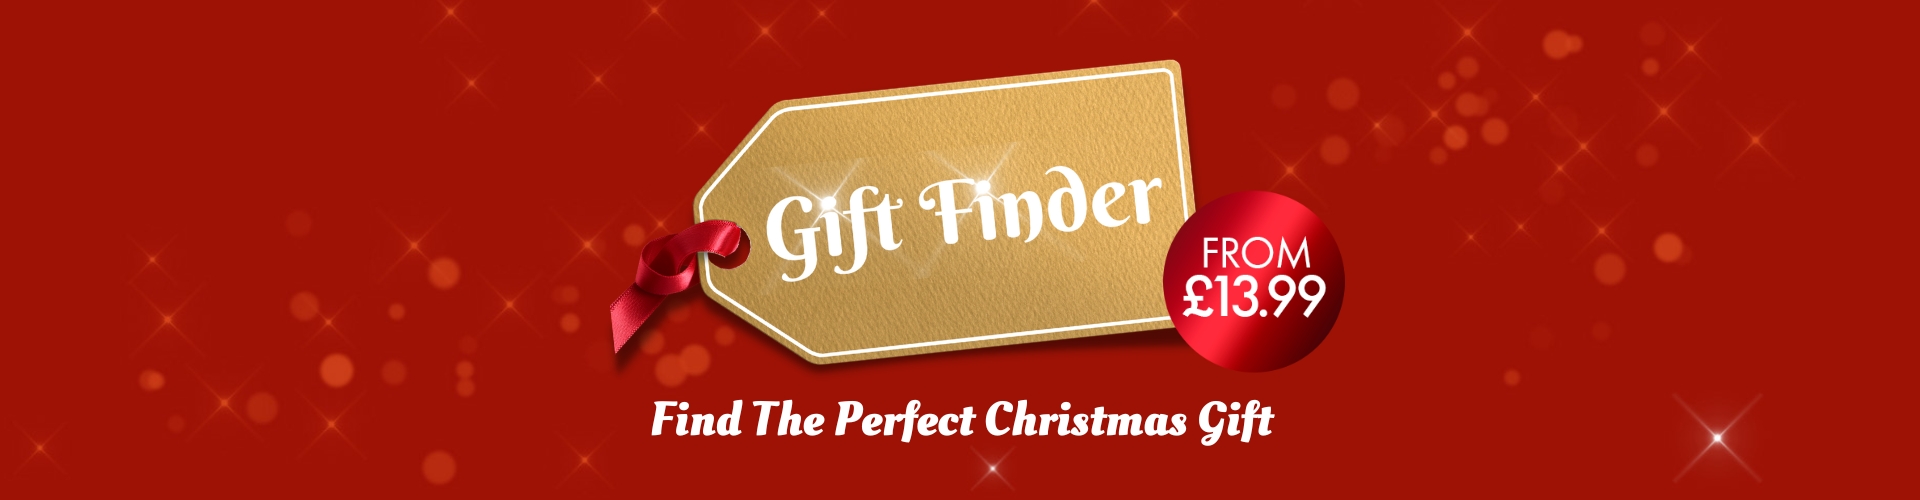 Gift Finder - Find The Perfect Christmas Gift